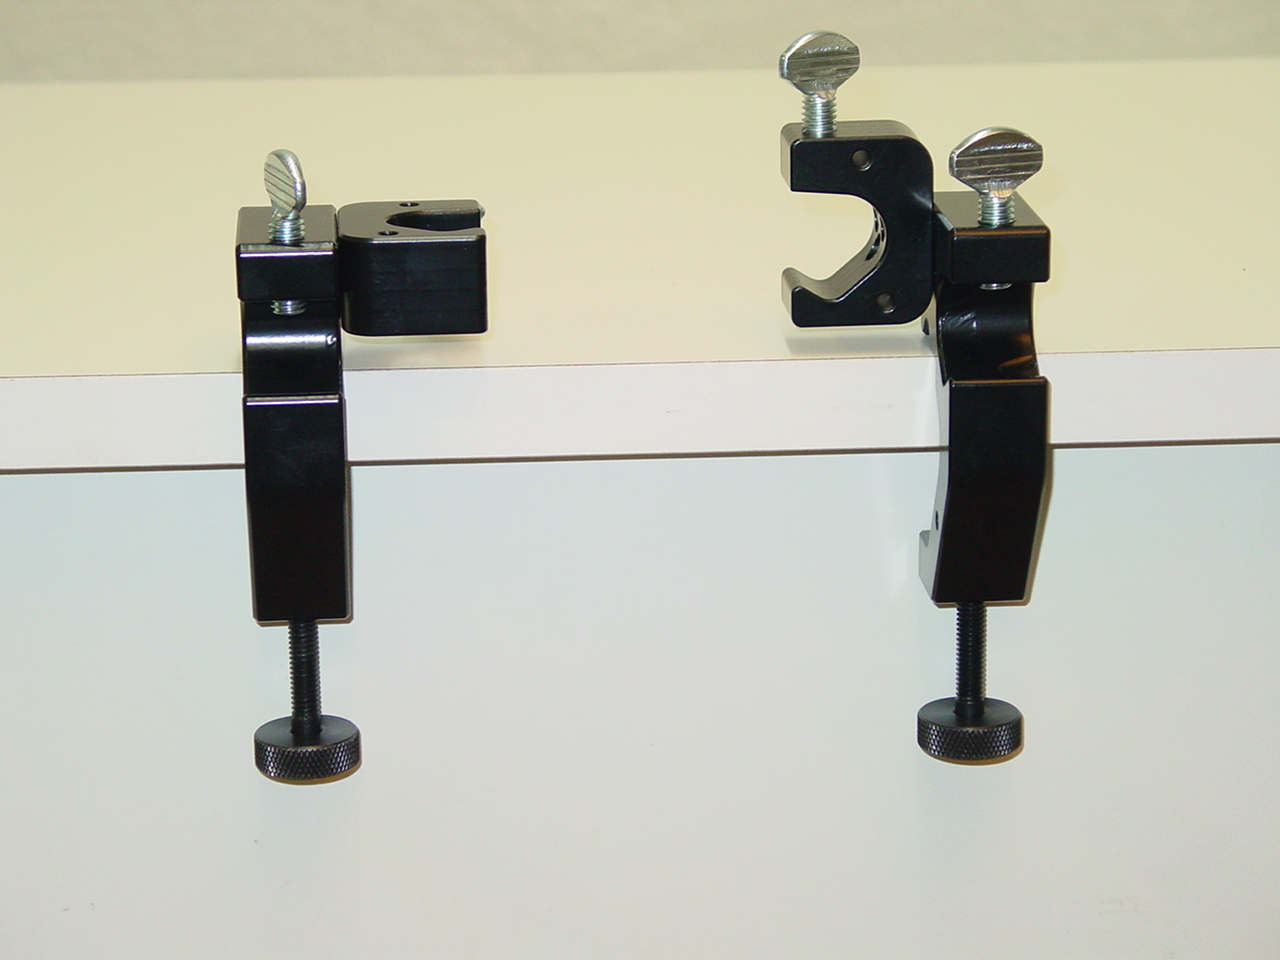 The MtP Wheelchair Clamp Attachment Holder